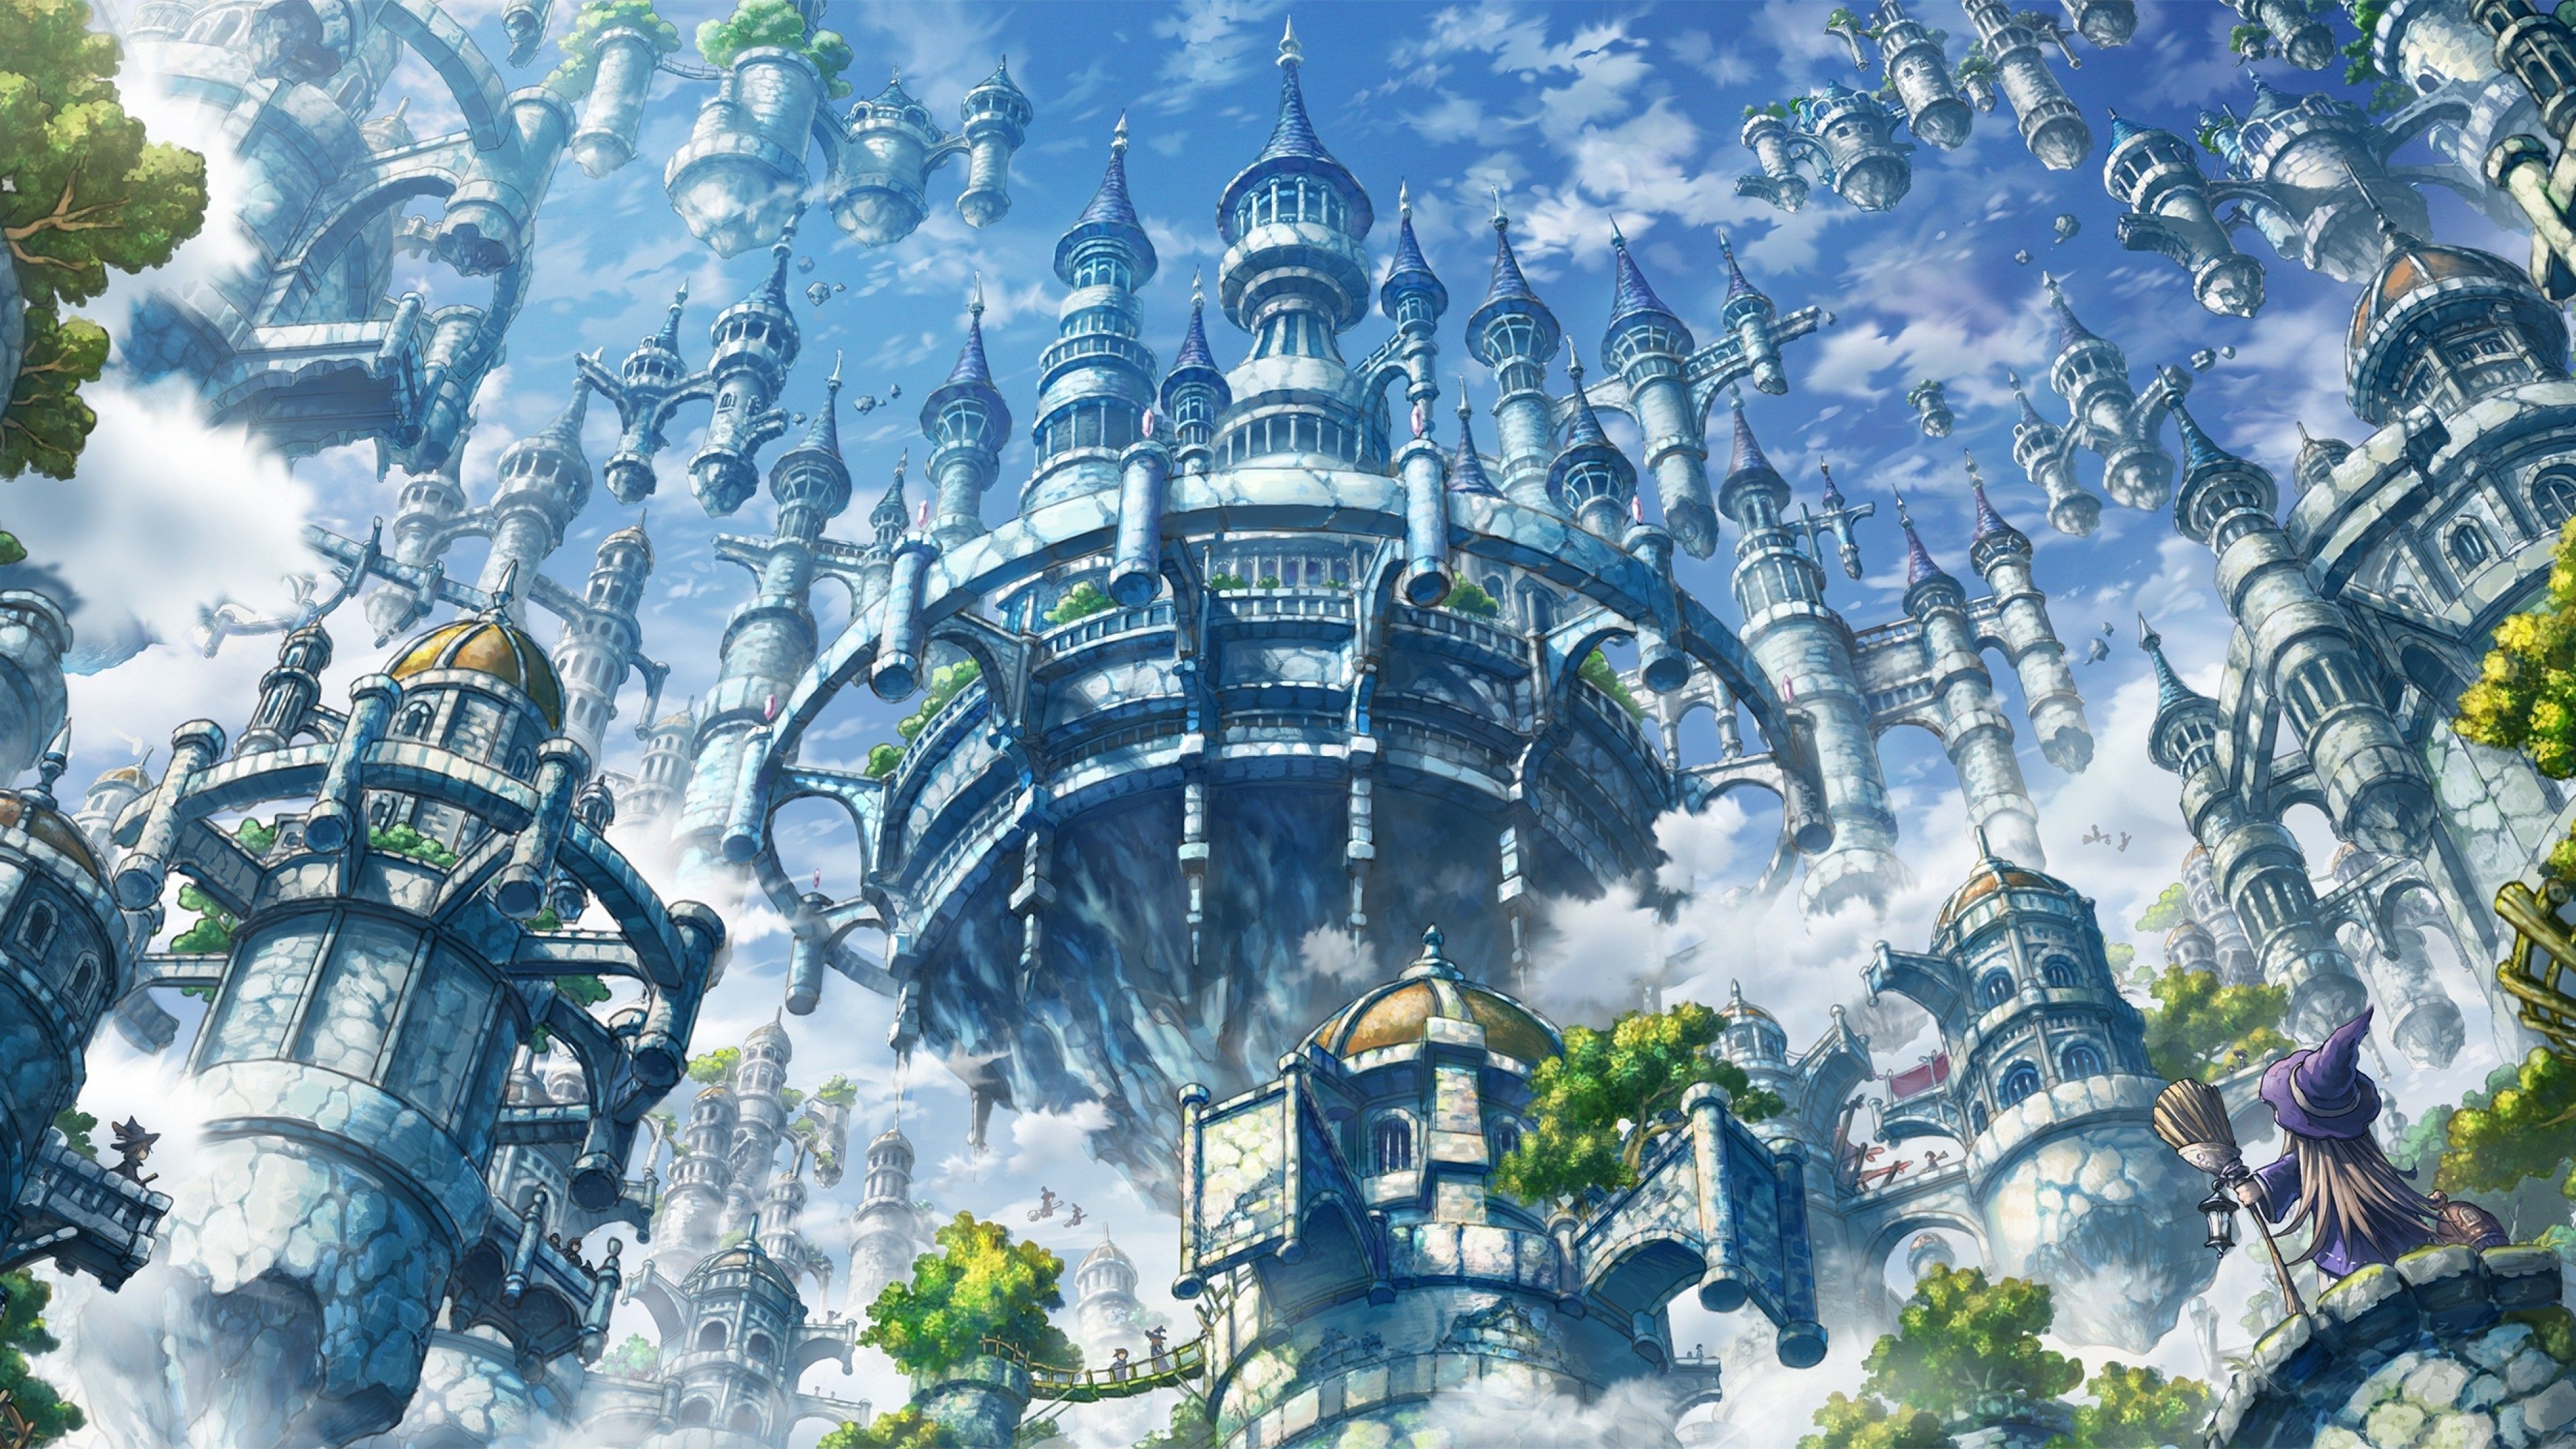 Download 3840x2160 Floating Castle, Fantasy World, Witch, Clouds